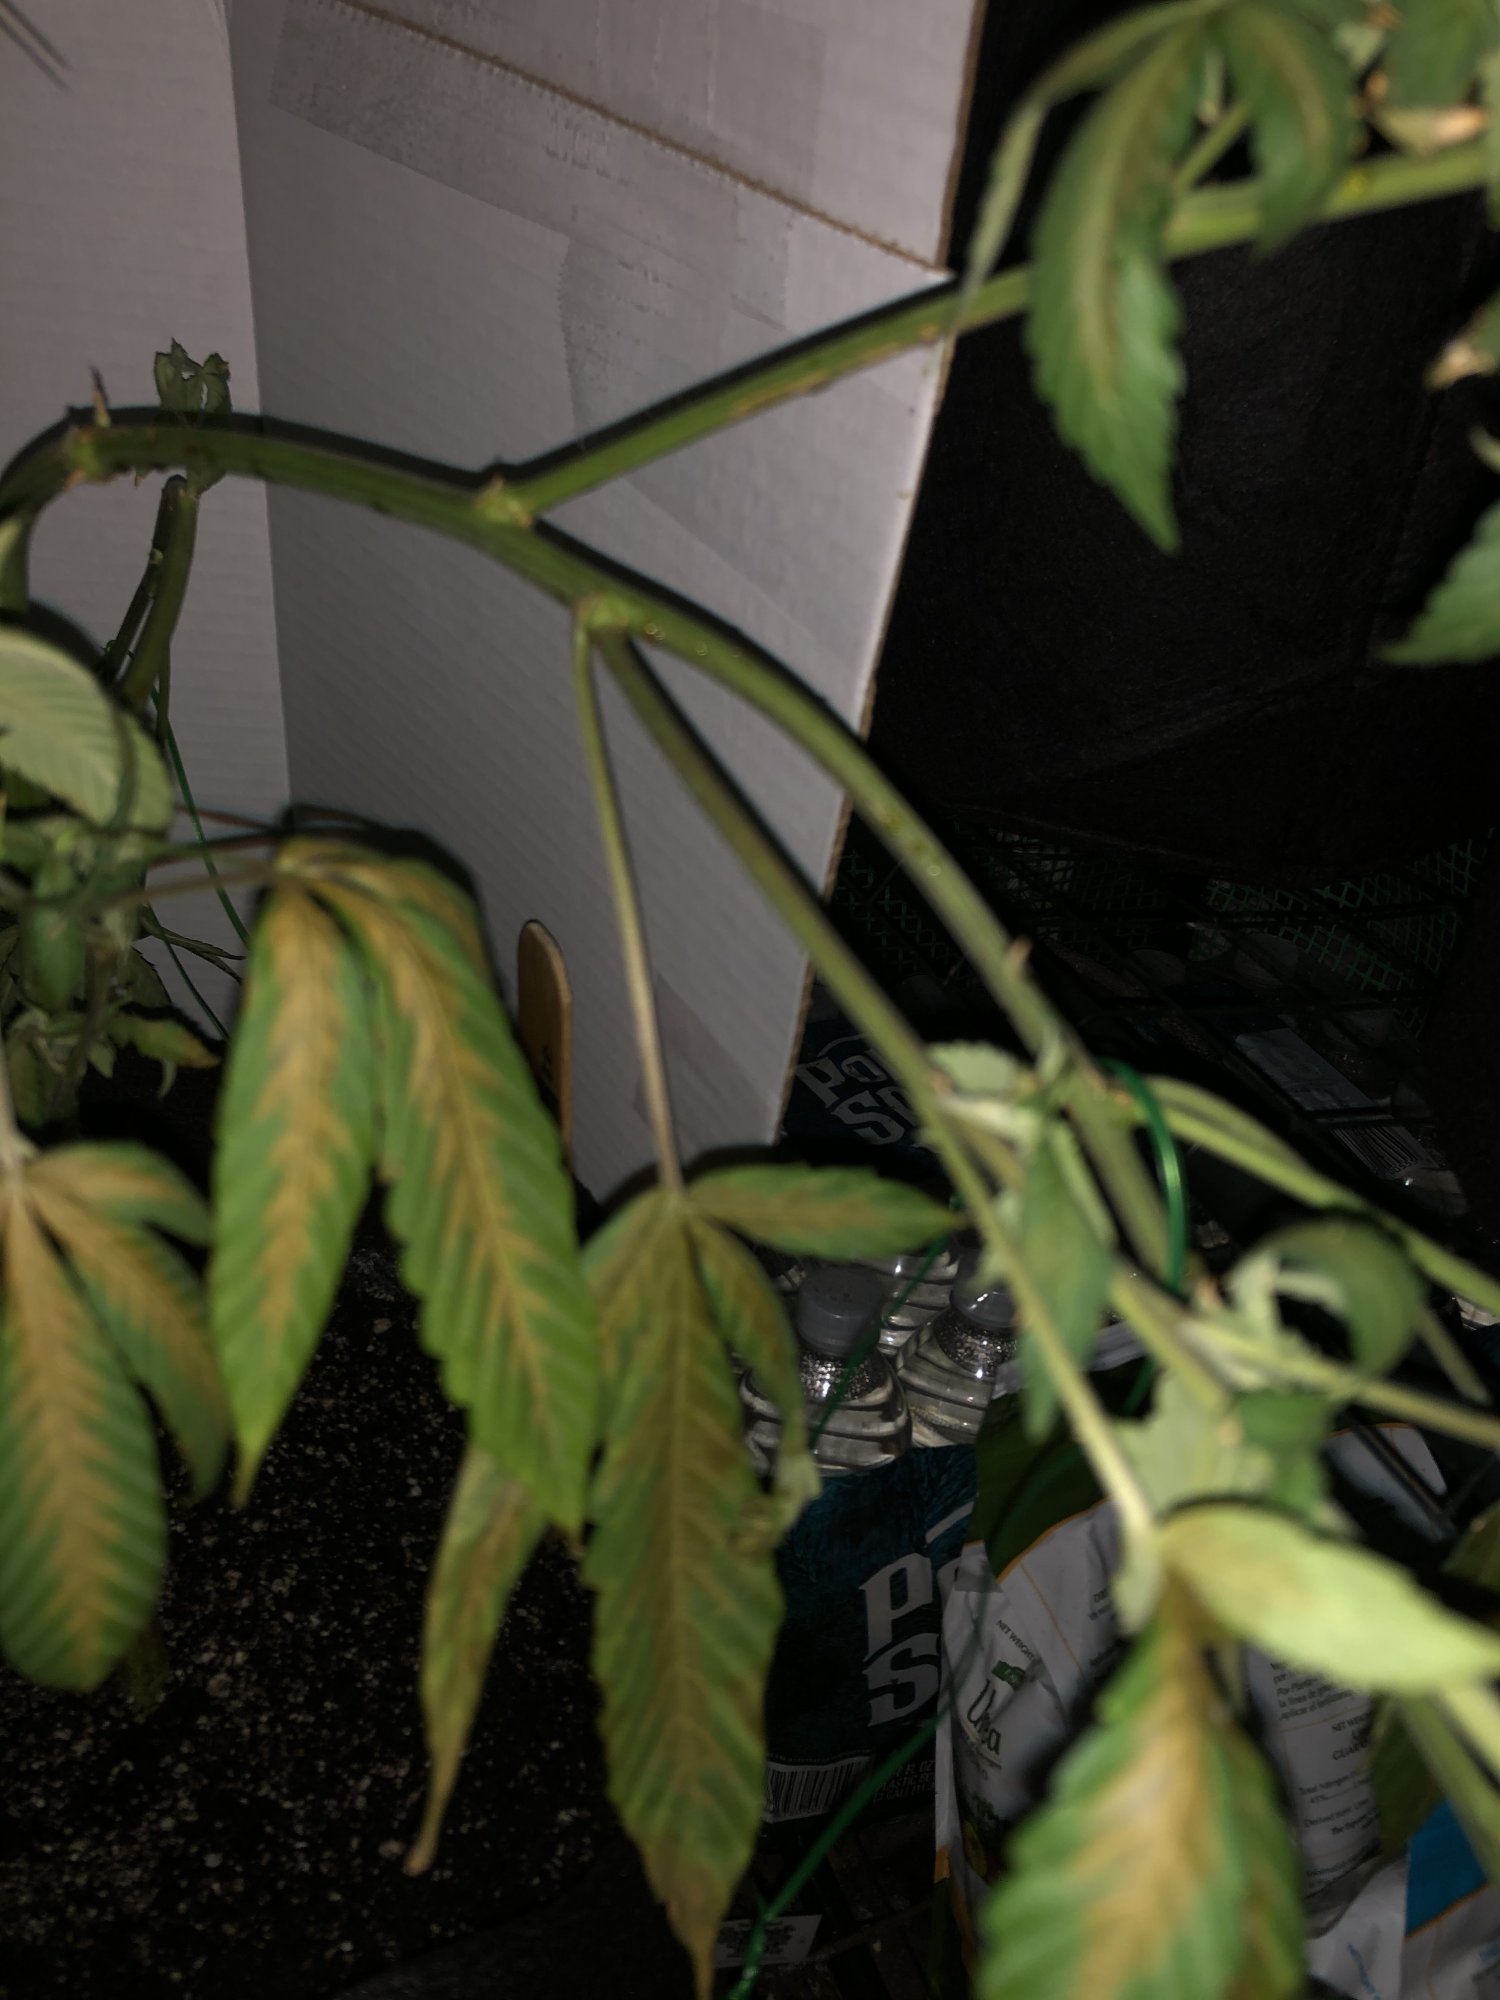 Leaves turning yellow  brown in the middle severe droop   whats wrong